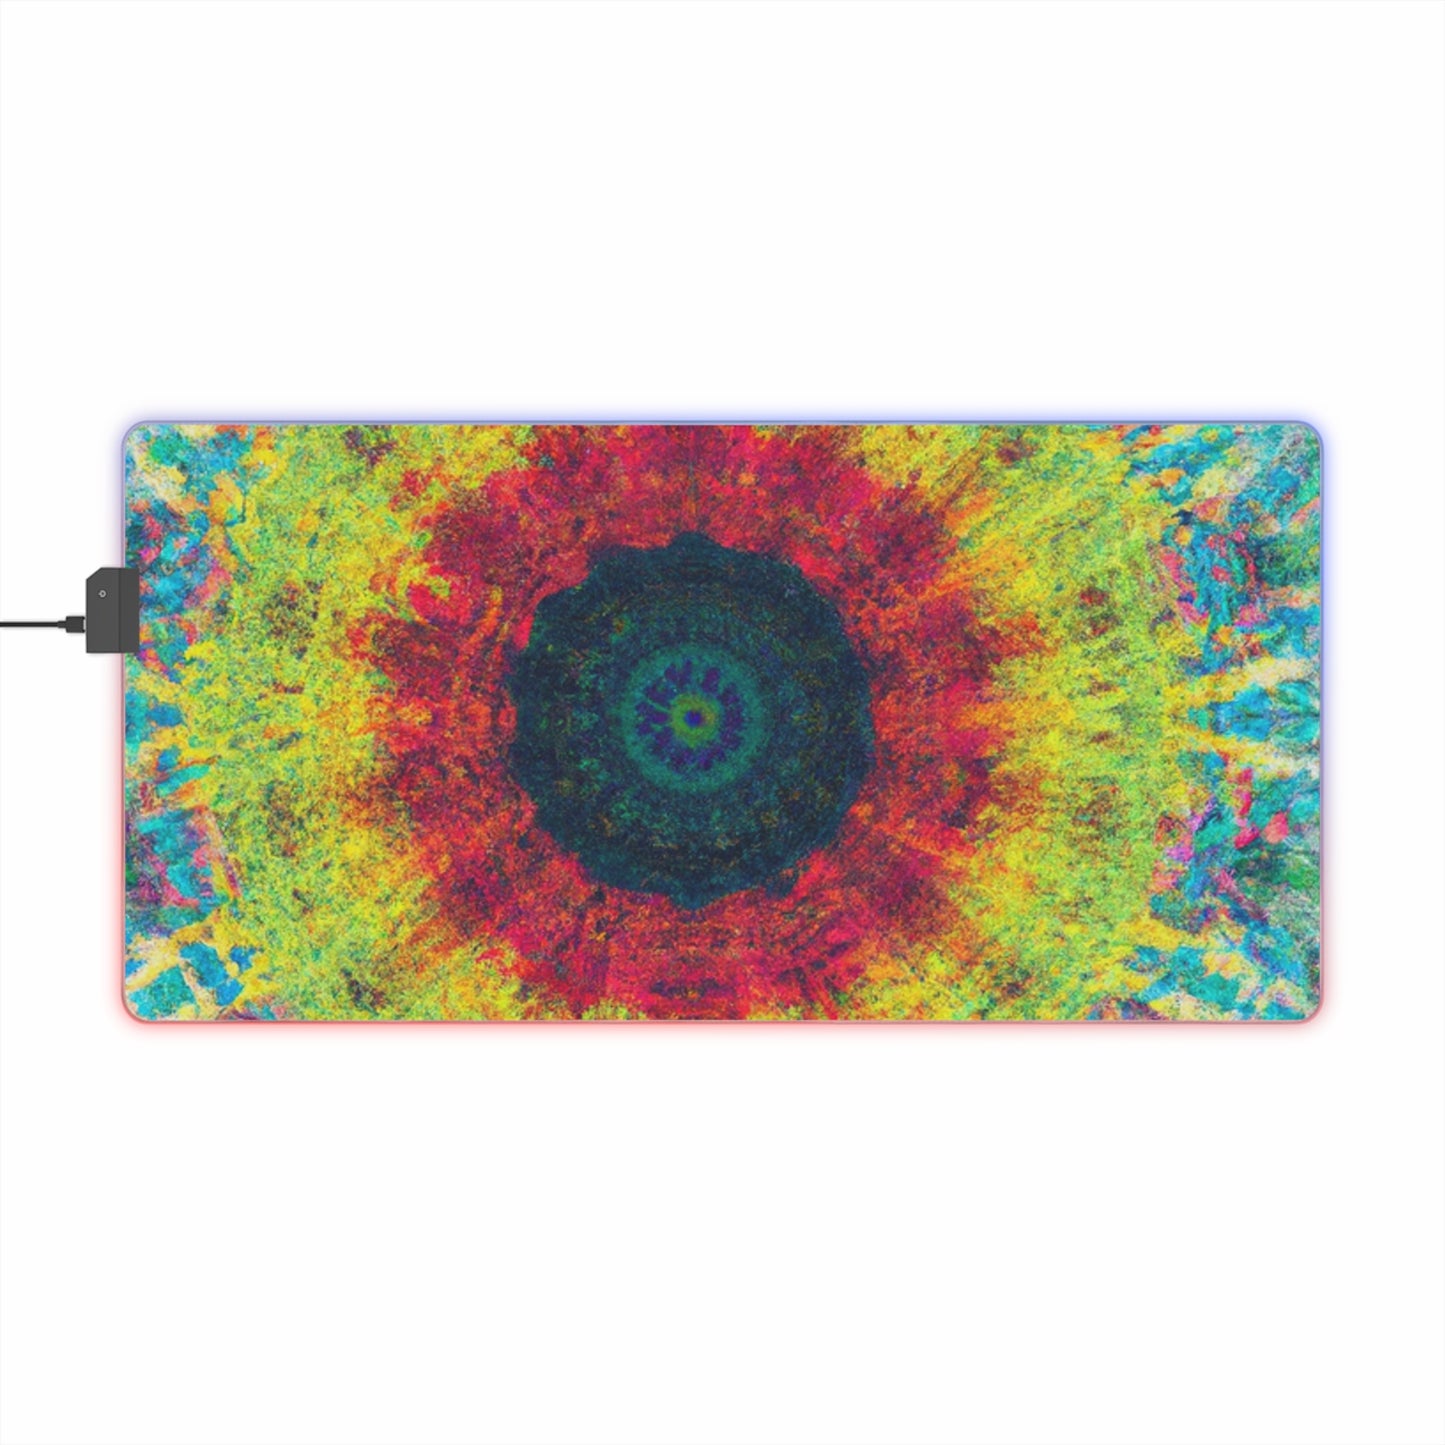 Rocky Rumblehot - Psychedelic Trippy LED Light Up Gaming Mouse Pad